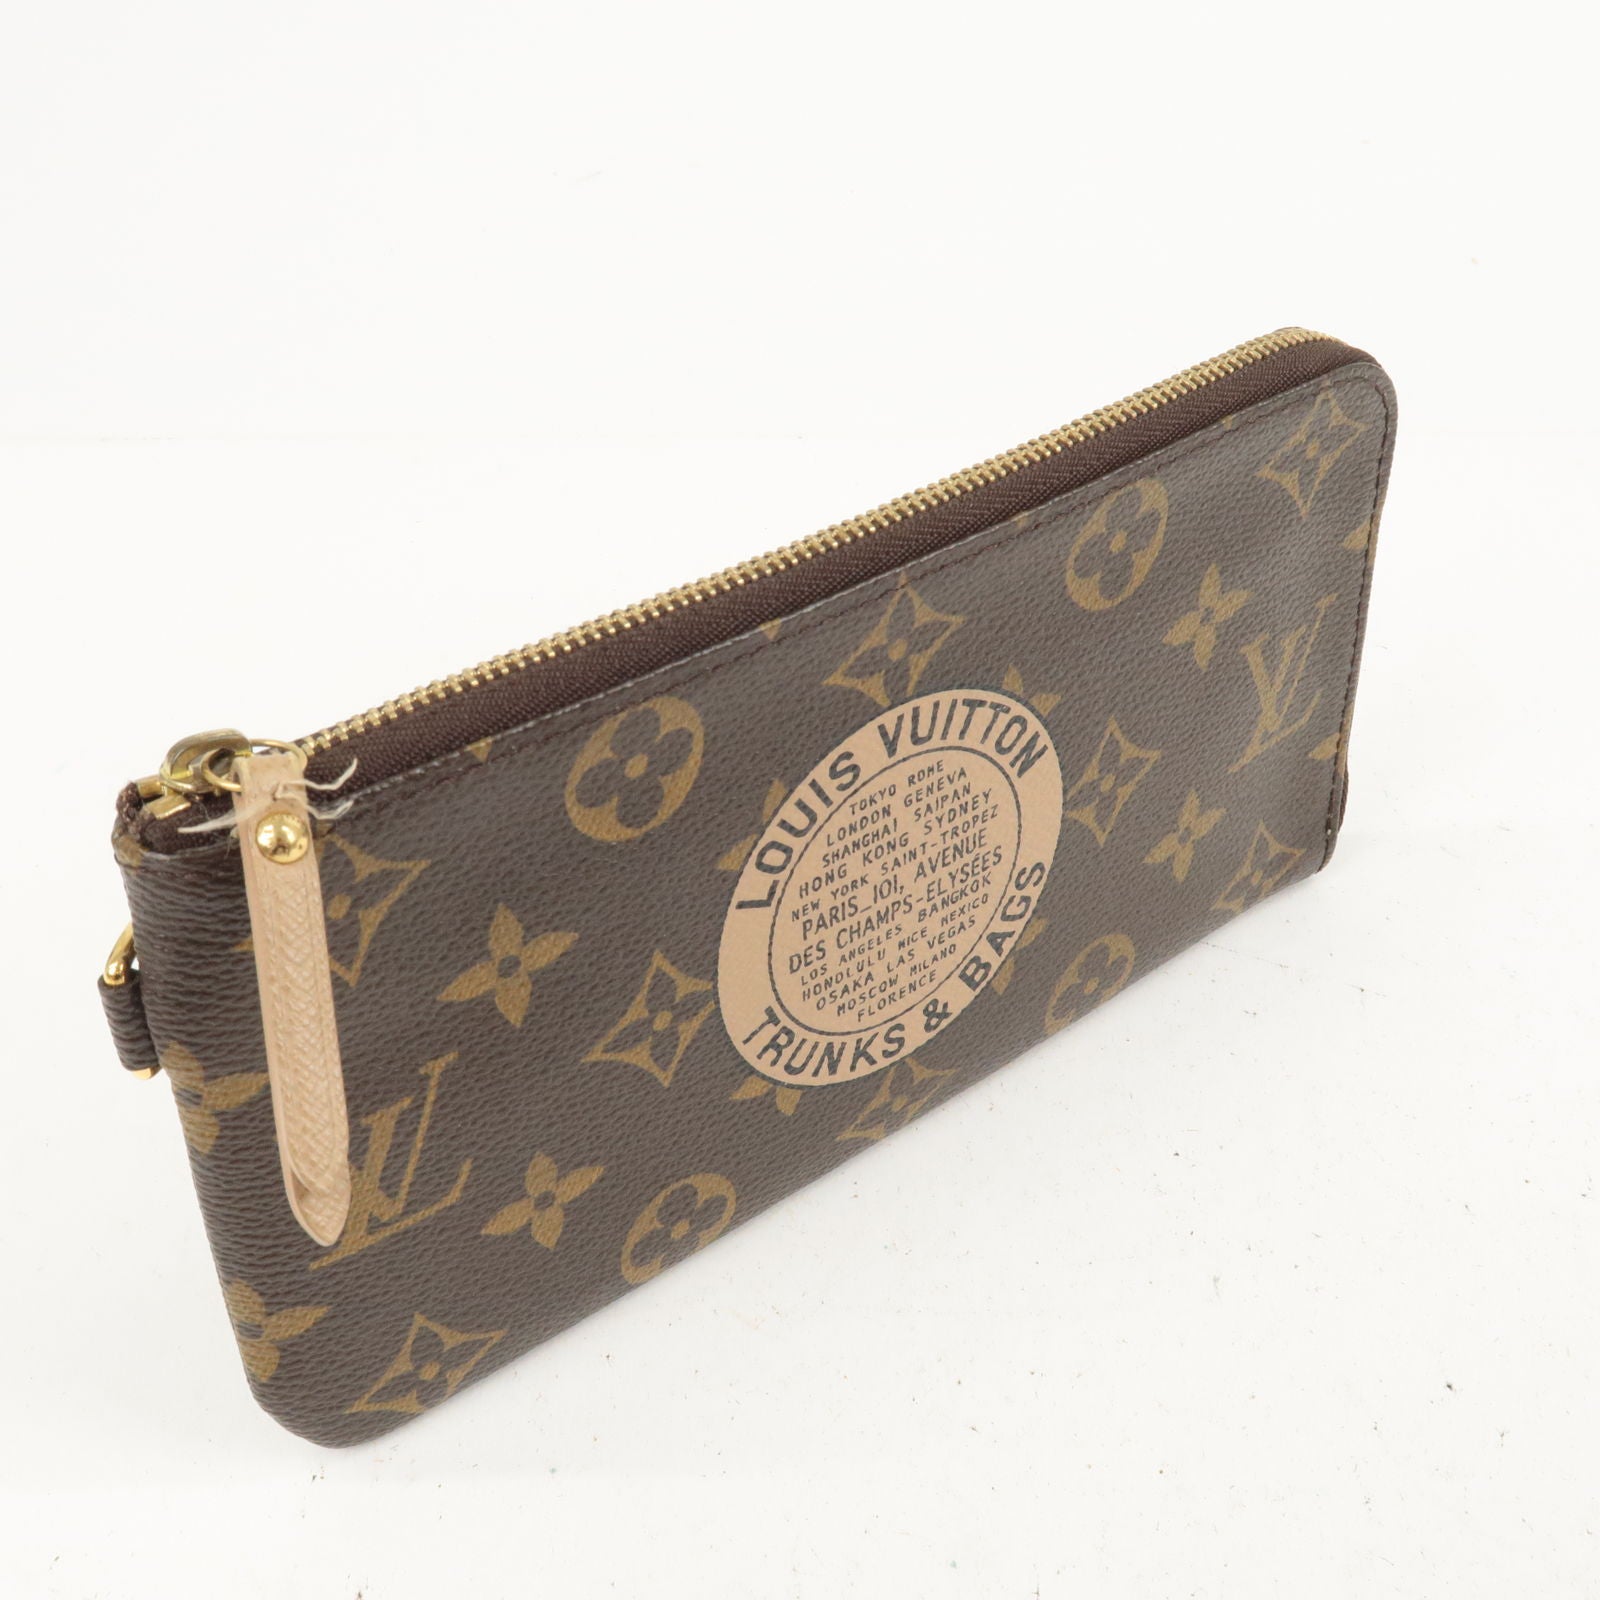 LOUIS VUITTON Monogram Complice Trunks and Bags Key Pouch Beige